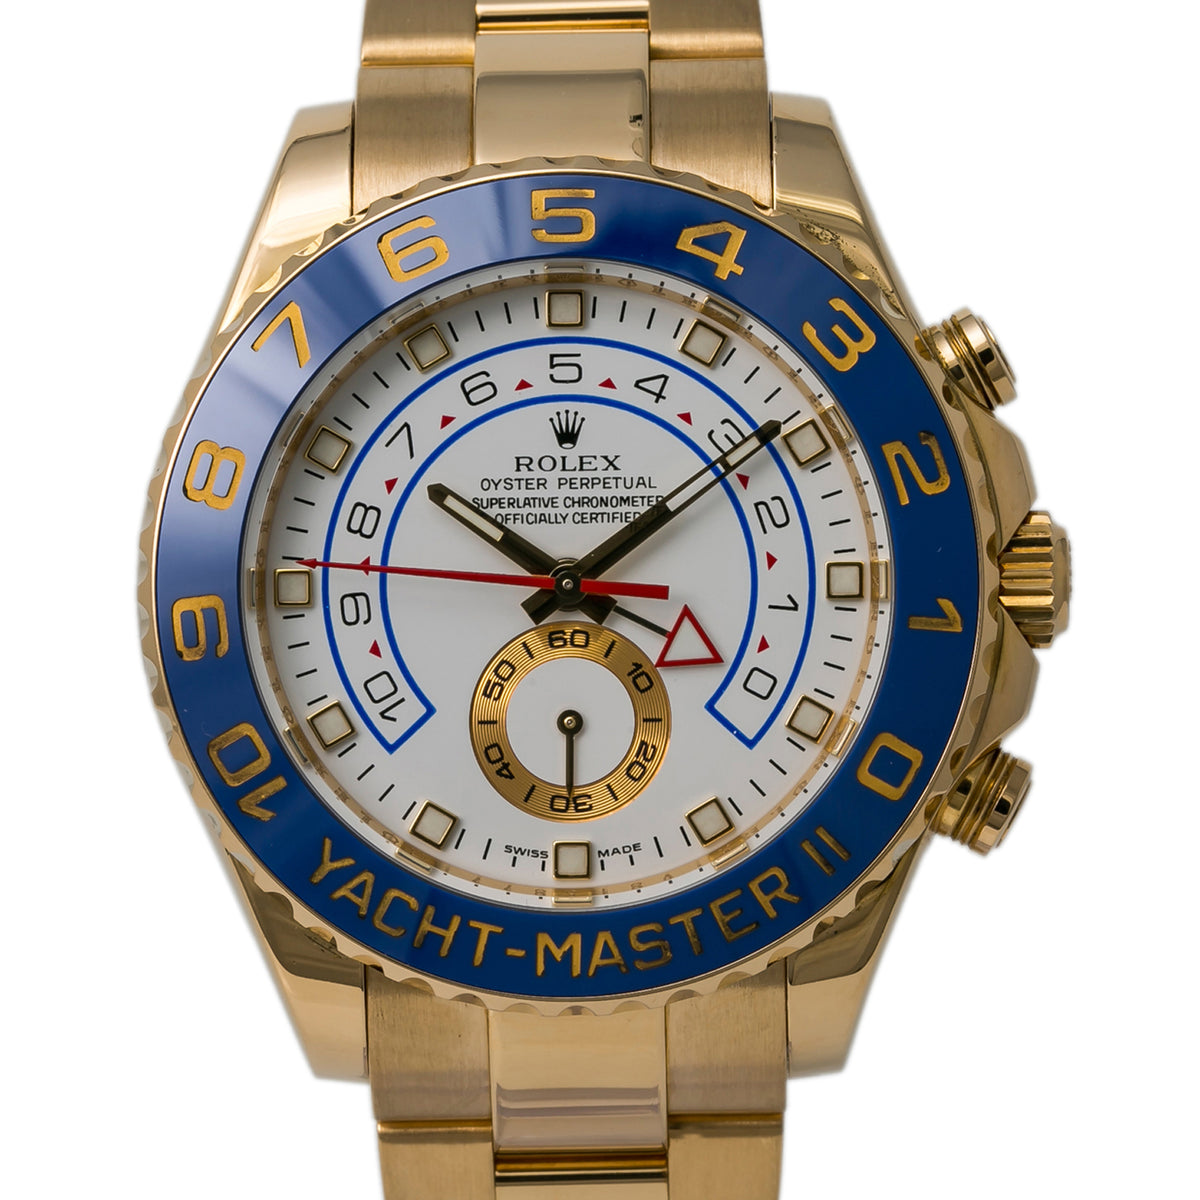 Rolex Yacht-Master II 116688 MINT NEW Condition 18k Yellow White DIal Watch 44mm